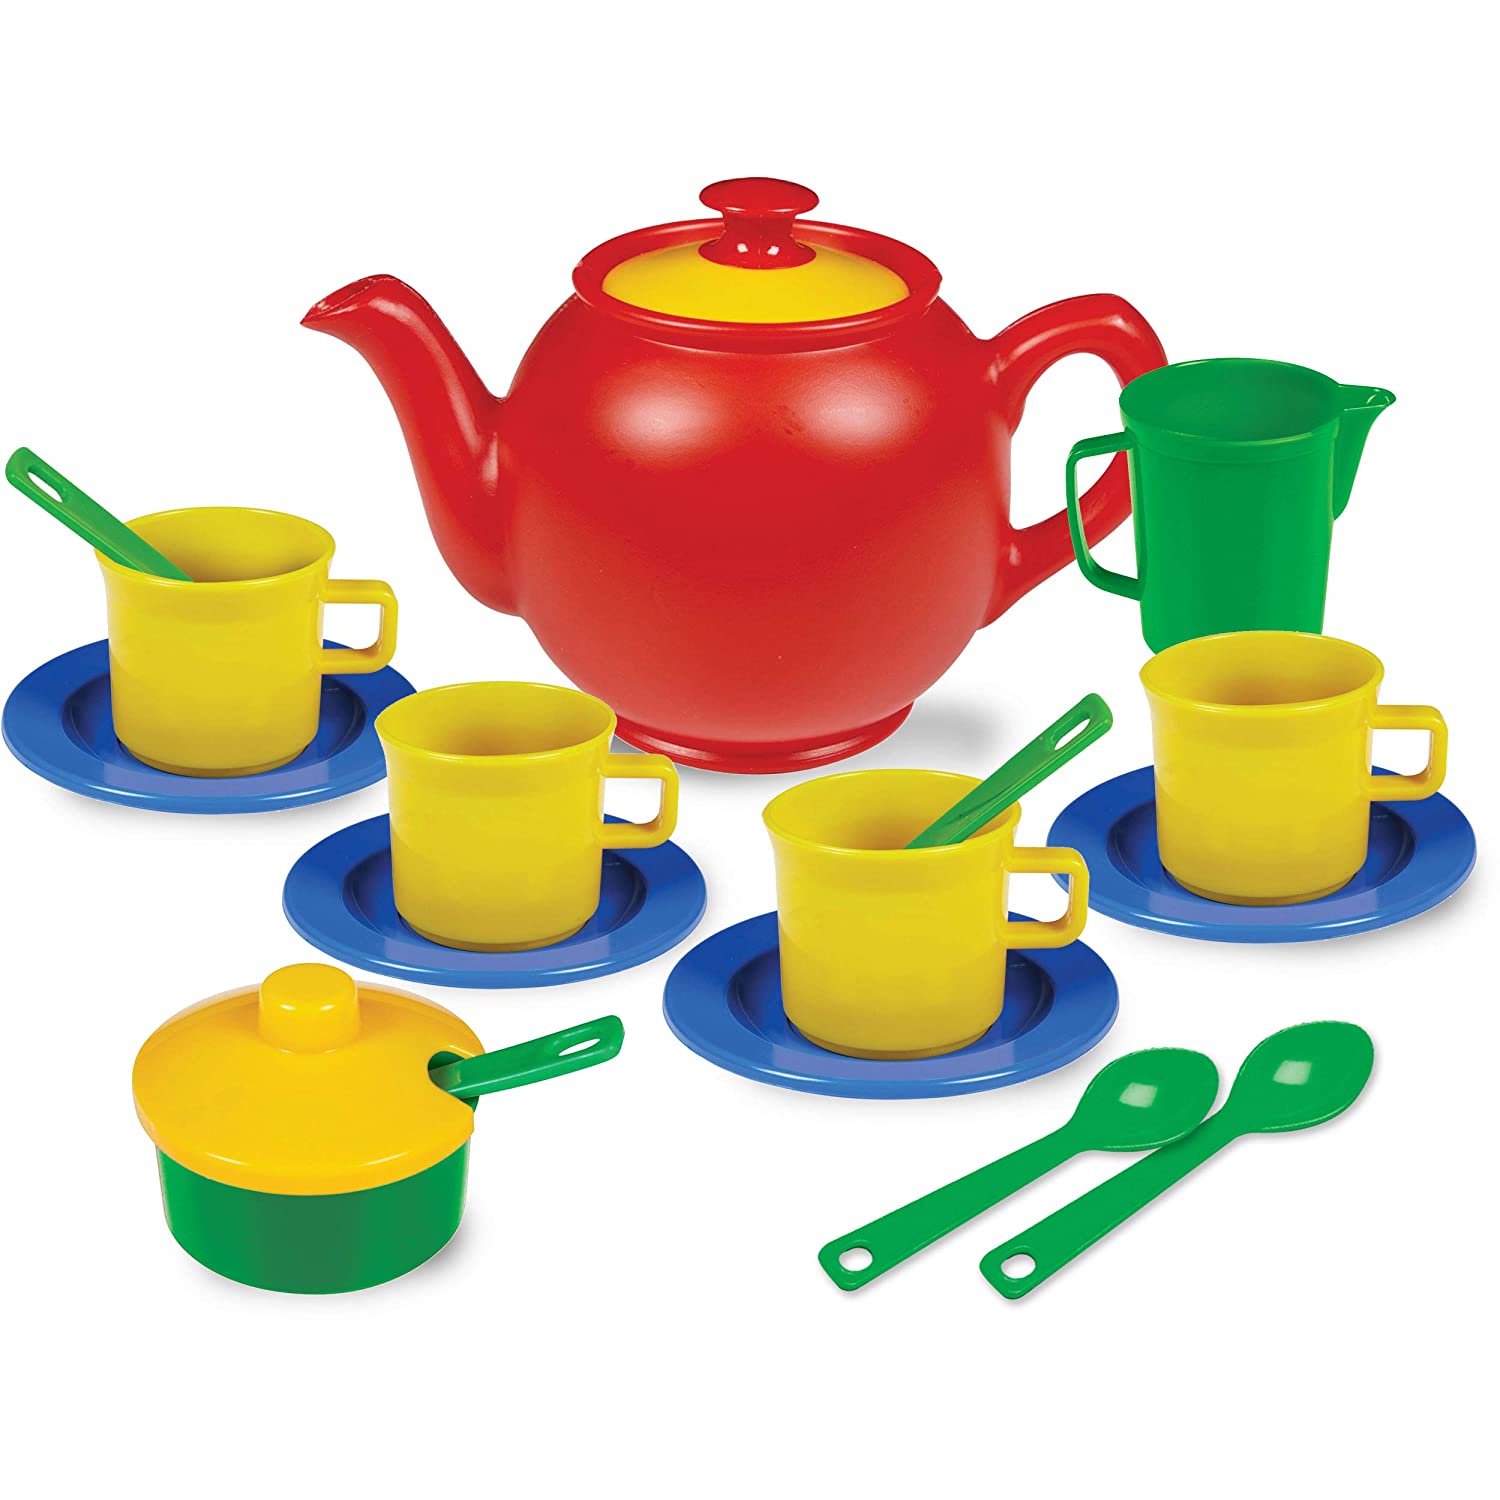 9 Best Kids Tea Sets 2023 - Buying Guide & Reviews 6